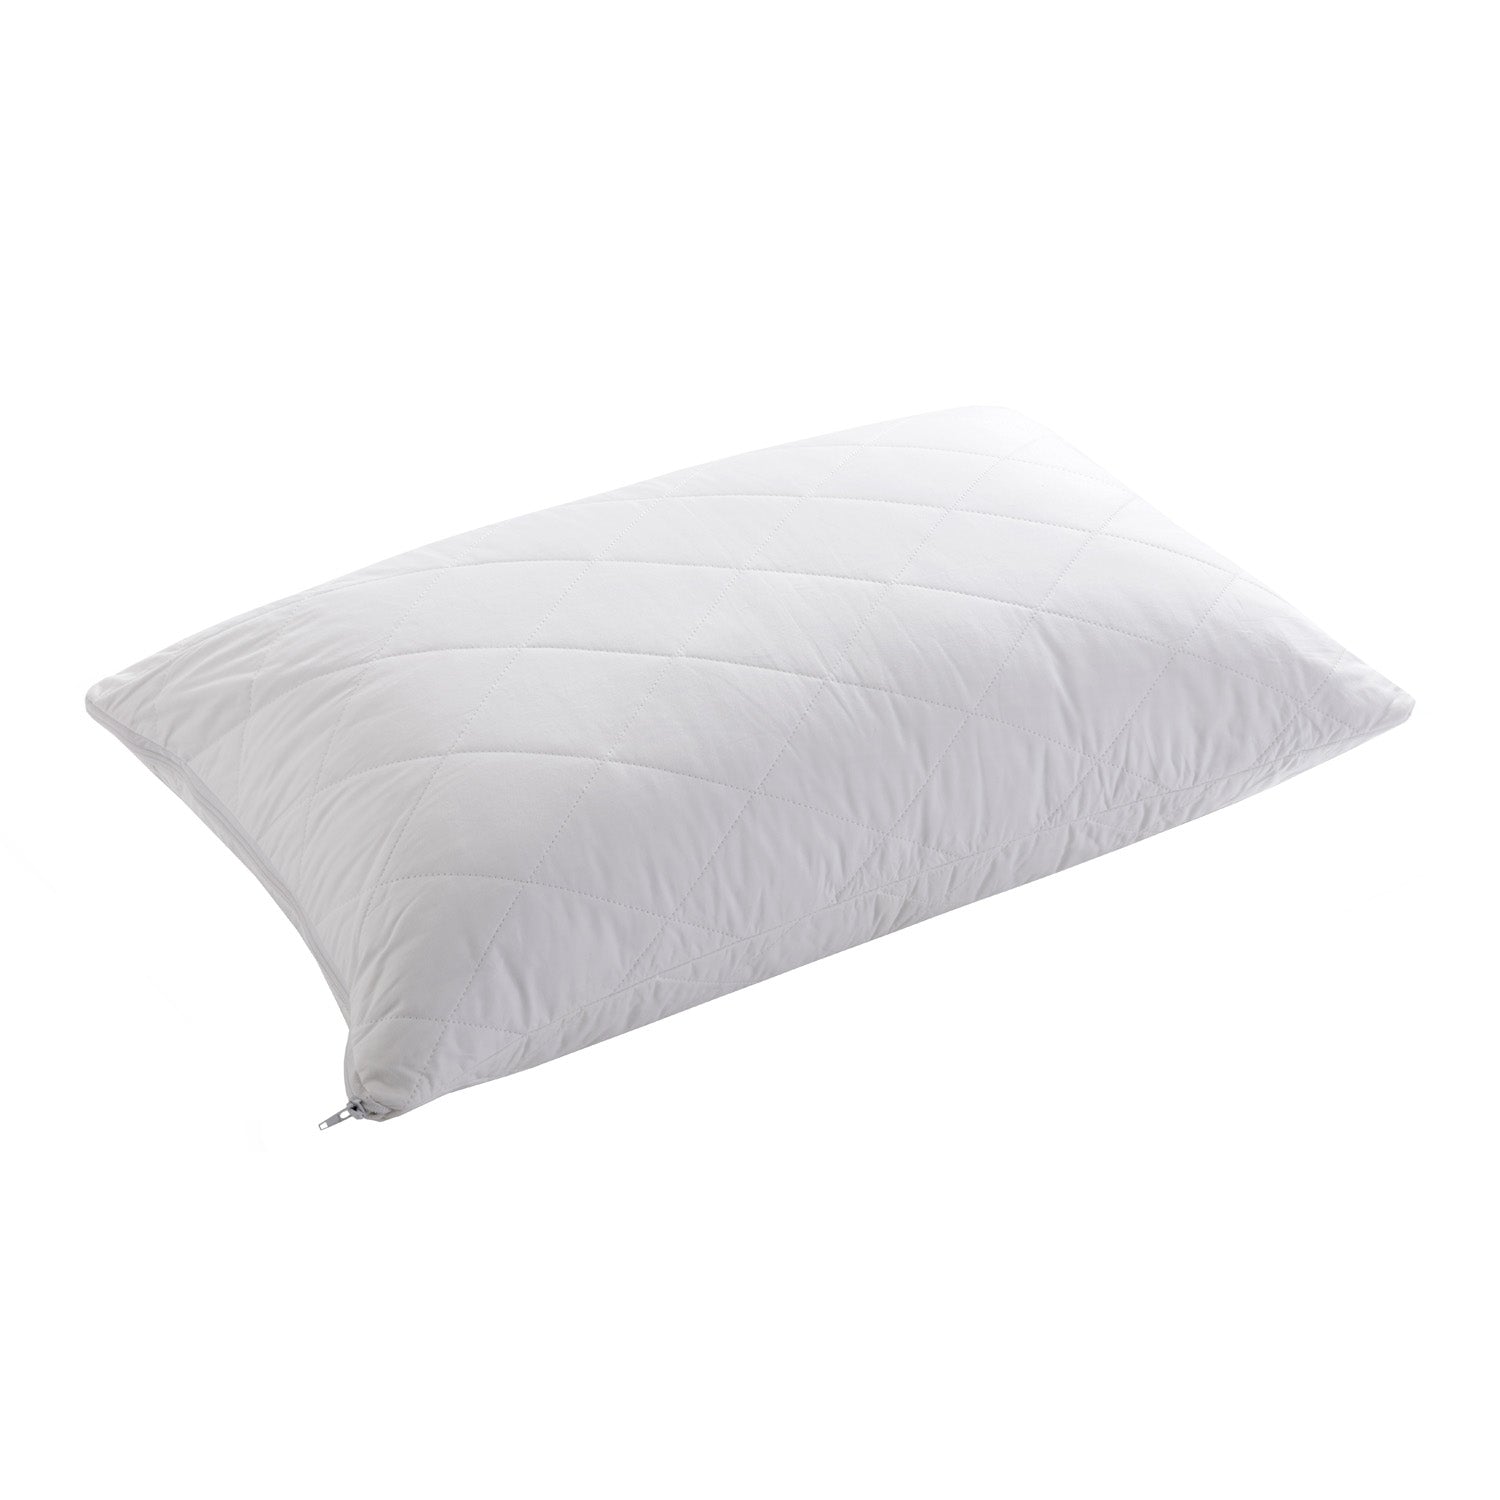 Comfort In Cotton Pillow Protector